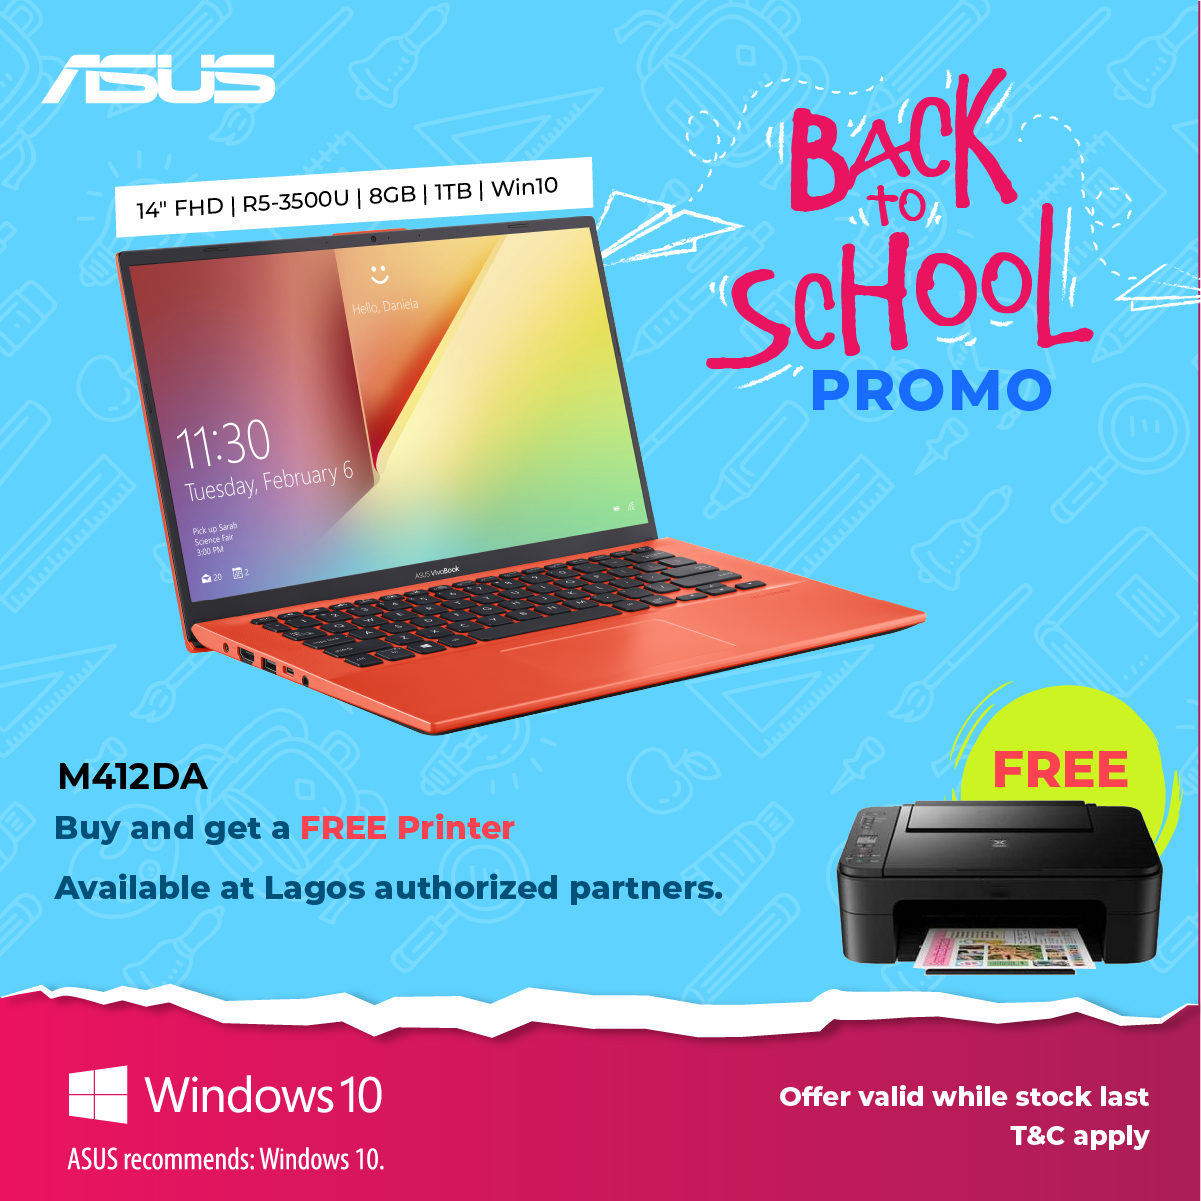 Get rewarded with a Free Wireless Printer when you Purchase an Eligible ASUS Windows 10 PC in the Ongoing to School Promotion | BellaNaija